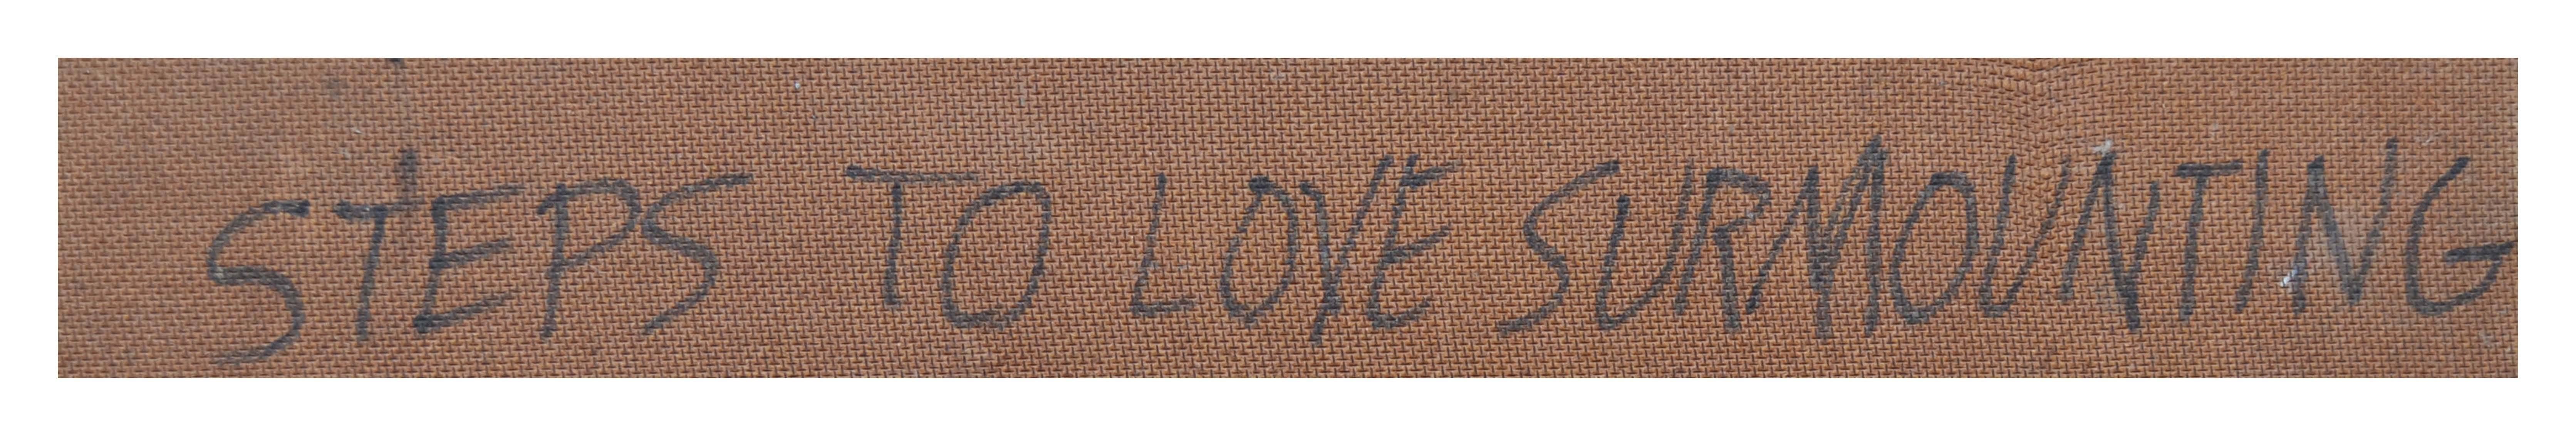 Steps to Love - Brown Abstract Painting by Les Anderson